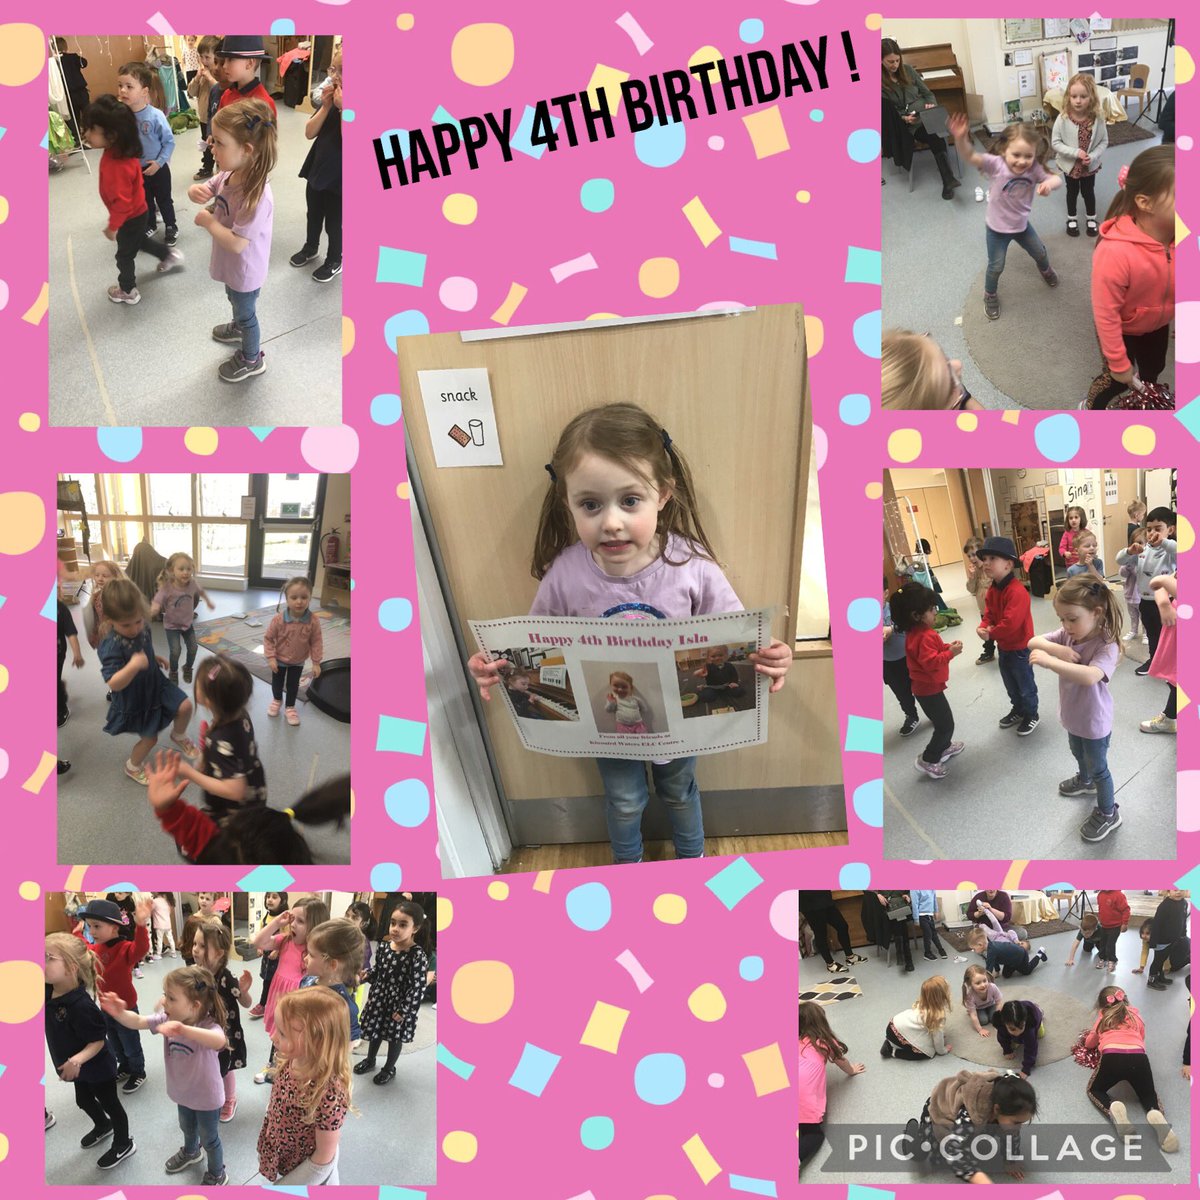 Today we celebrated I’s 4th birthday by having a dance party. I’ showed off all her best dance moves when playing musical statues and made a special request for her favourite song Wind the Bobbin up, singing along and doing all the actions with her friends. Happy 4th Birthday !